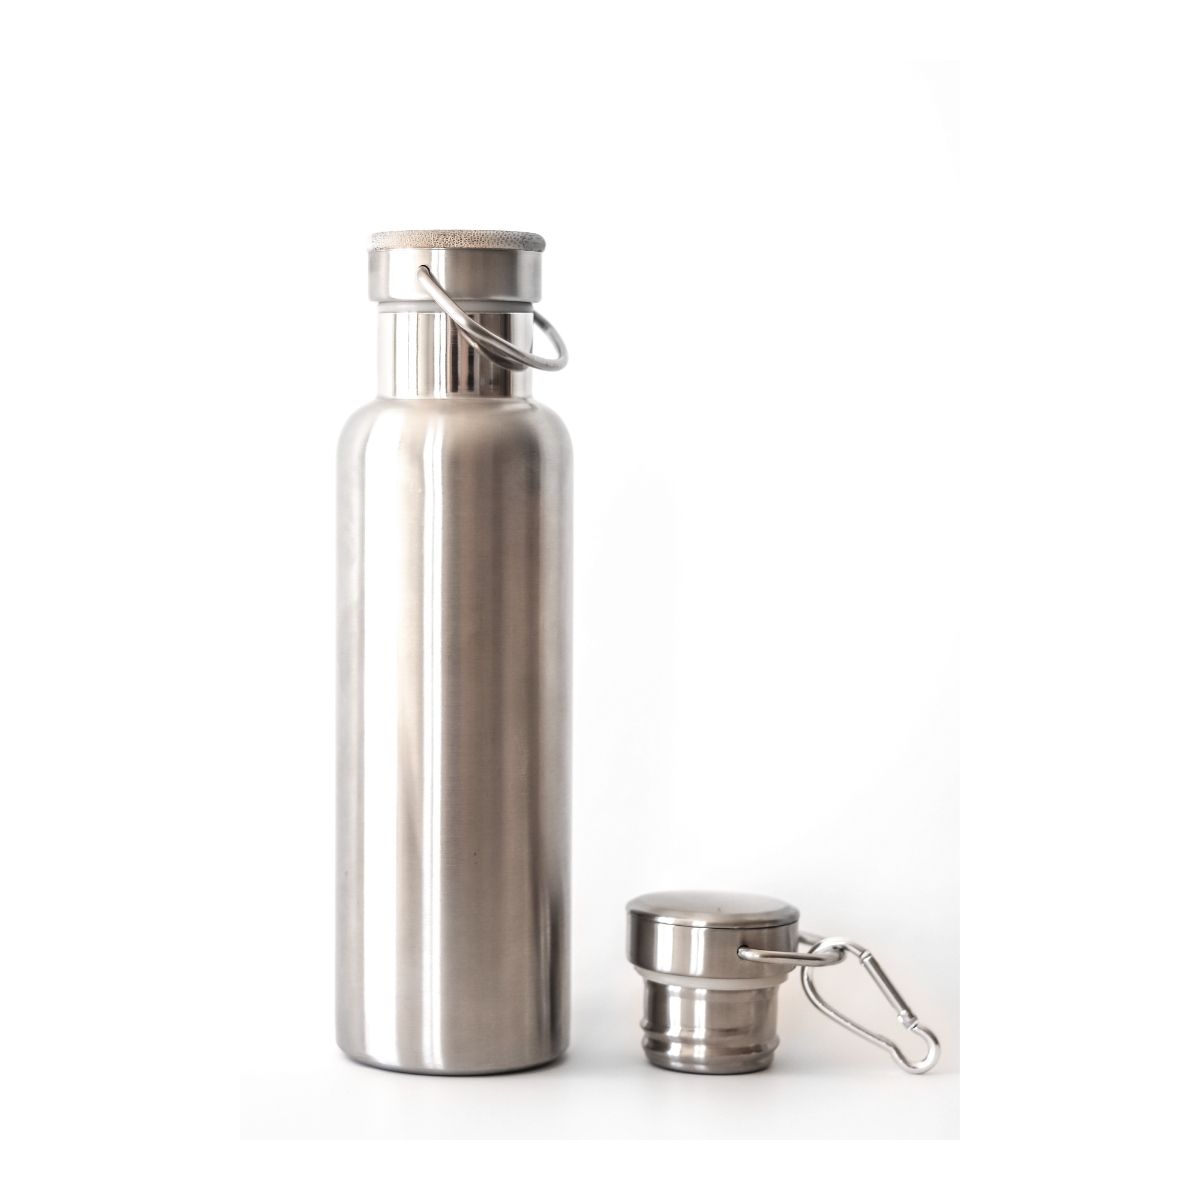 23. Toast to 8 Years of Love with a Copper Water Bottle - A Unique and Thoughtful Anniversary Gift